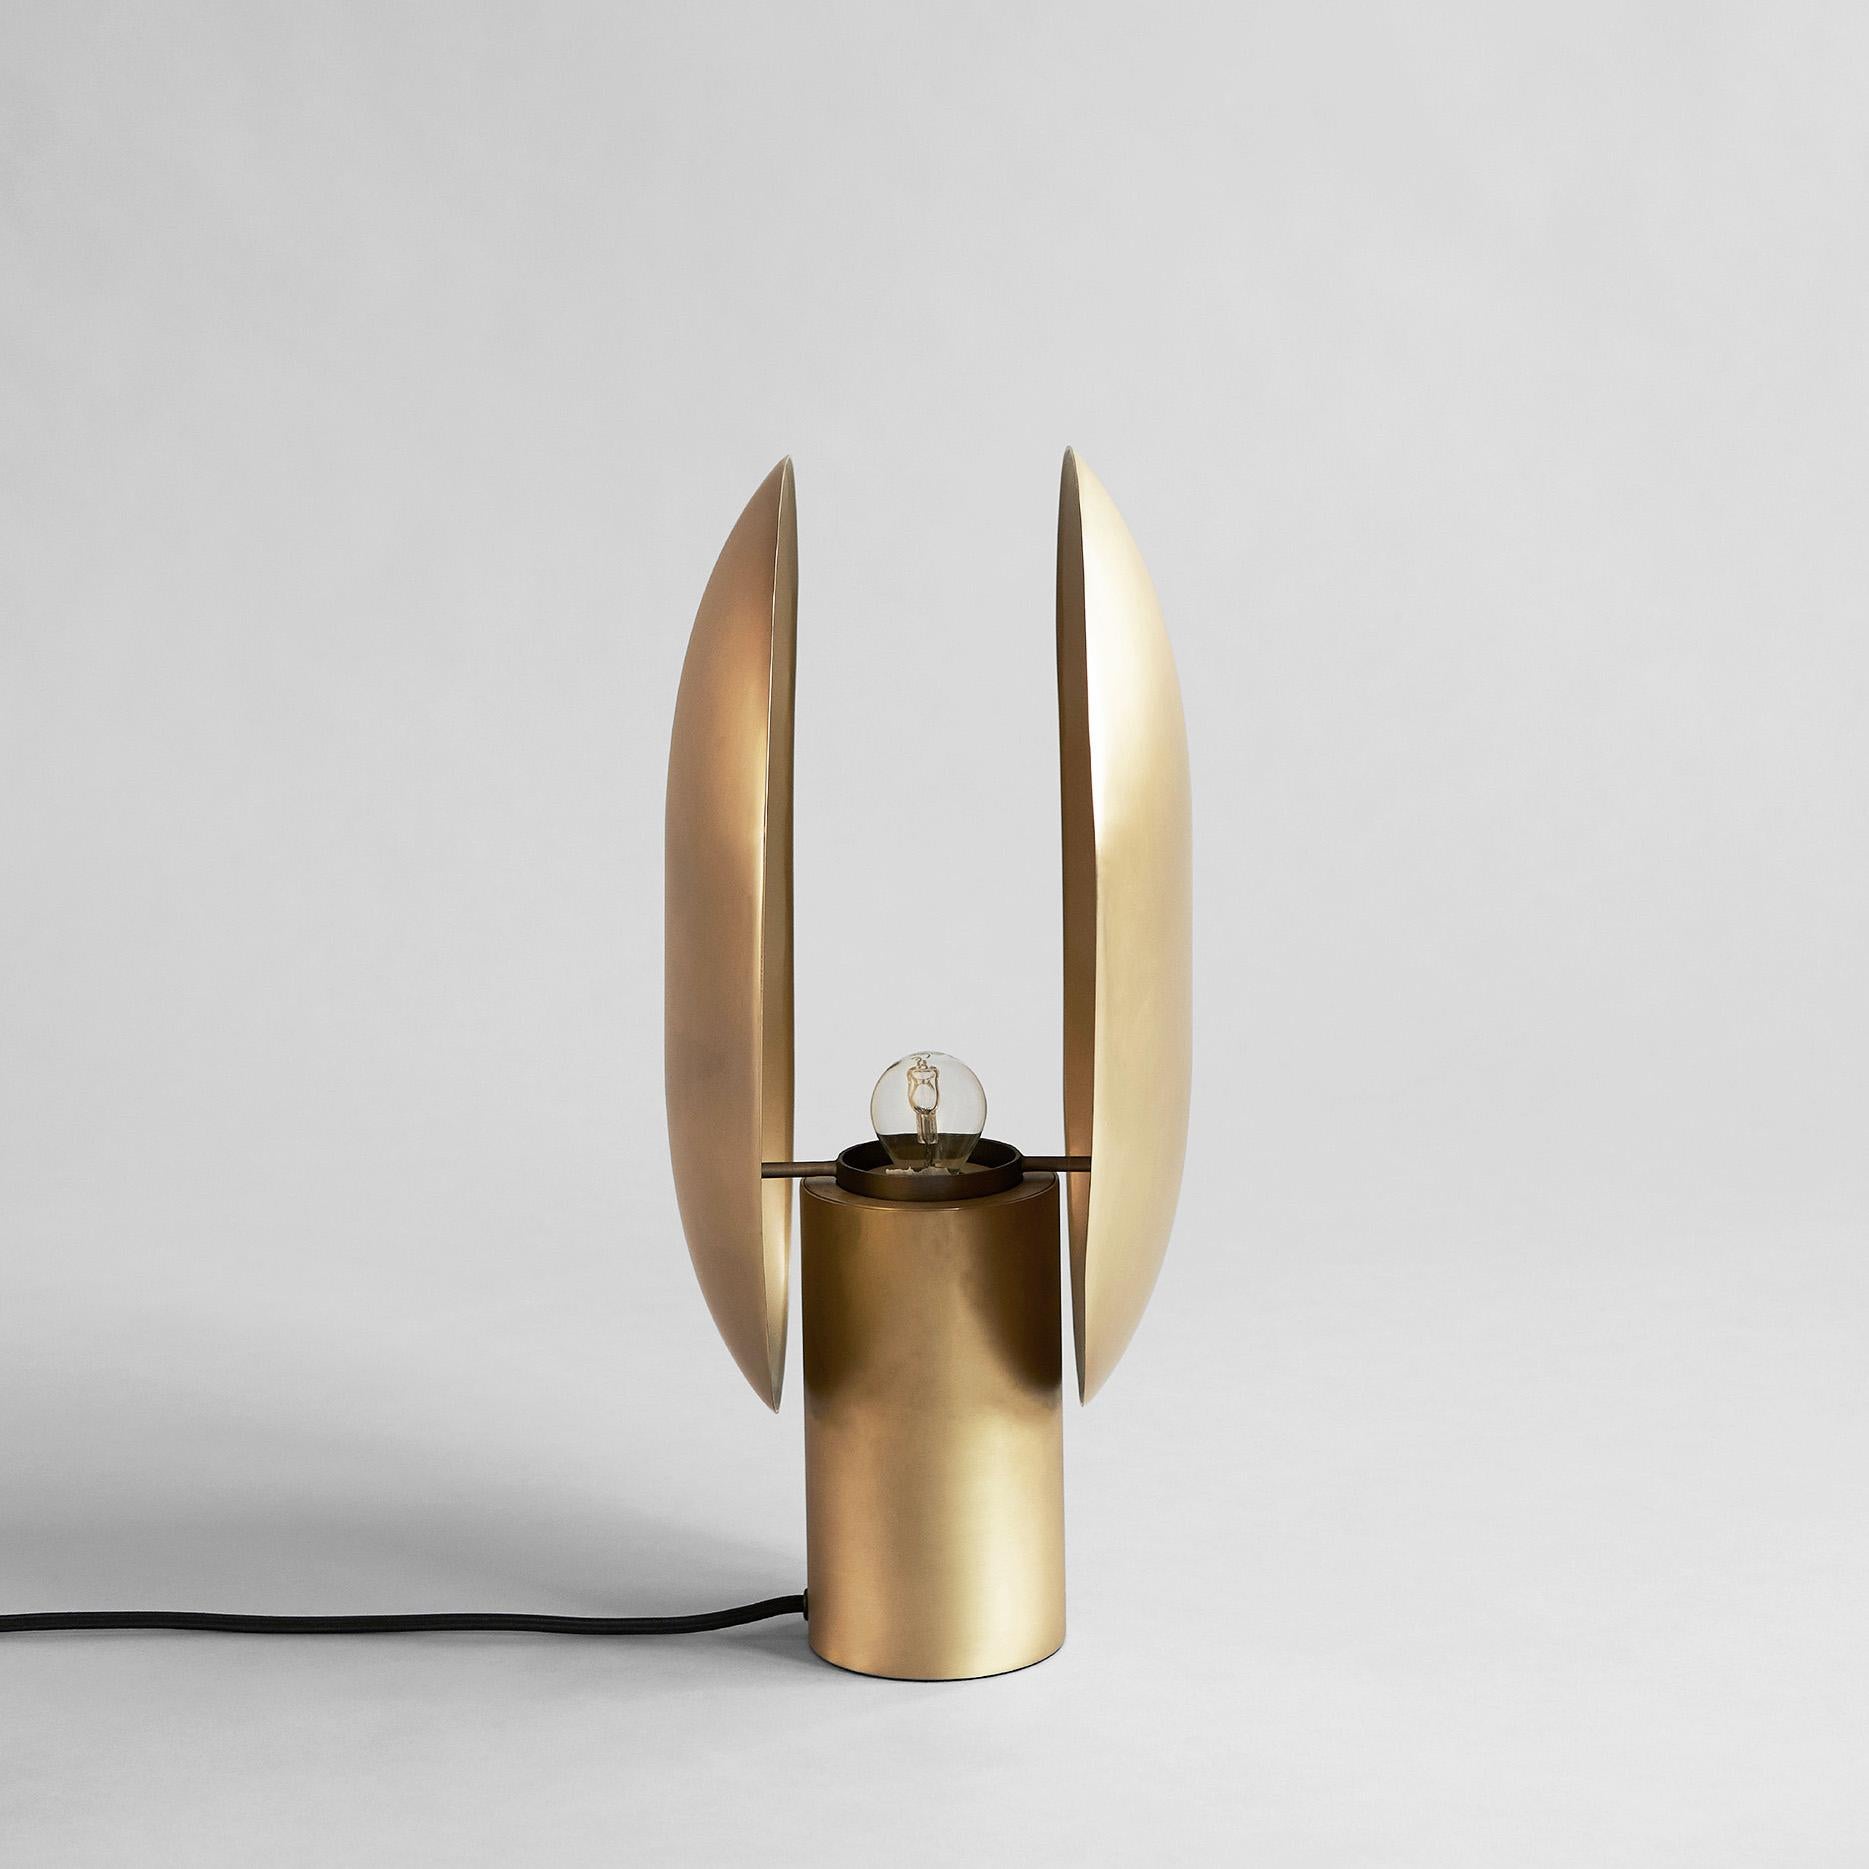 Brass clam table lamp by 101 Copenhagen
Designed by Kristian Sofus Hansen & Tommy Hyldahl
Dimensions: L 30 x W 15 x H 43,5 cm
Cable length: 200 cm
This product is not wired for USA
Materials: Metal: Plated metal / brass
Cable: Fabric covered cable /